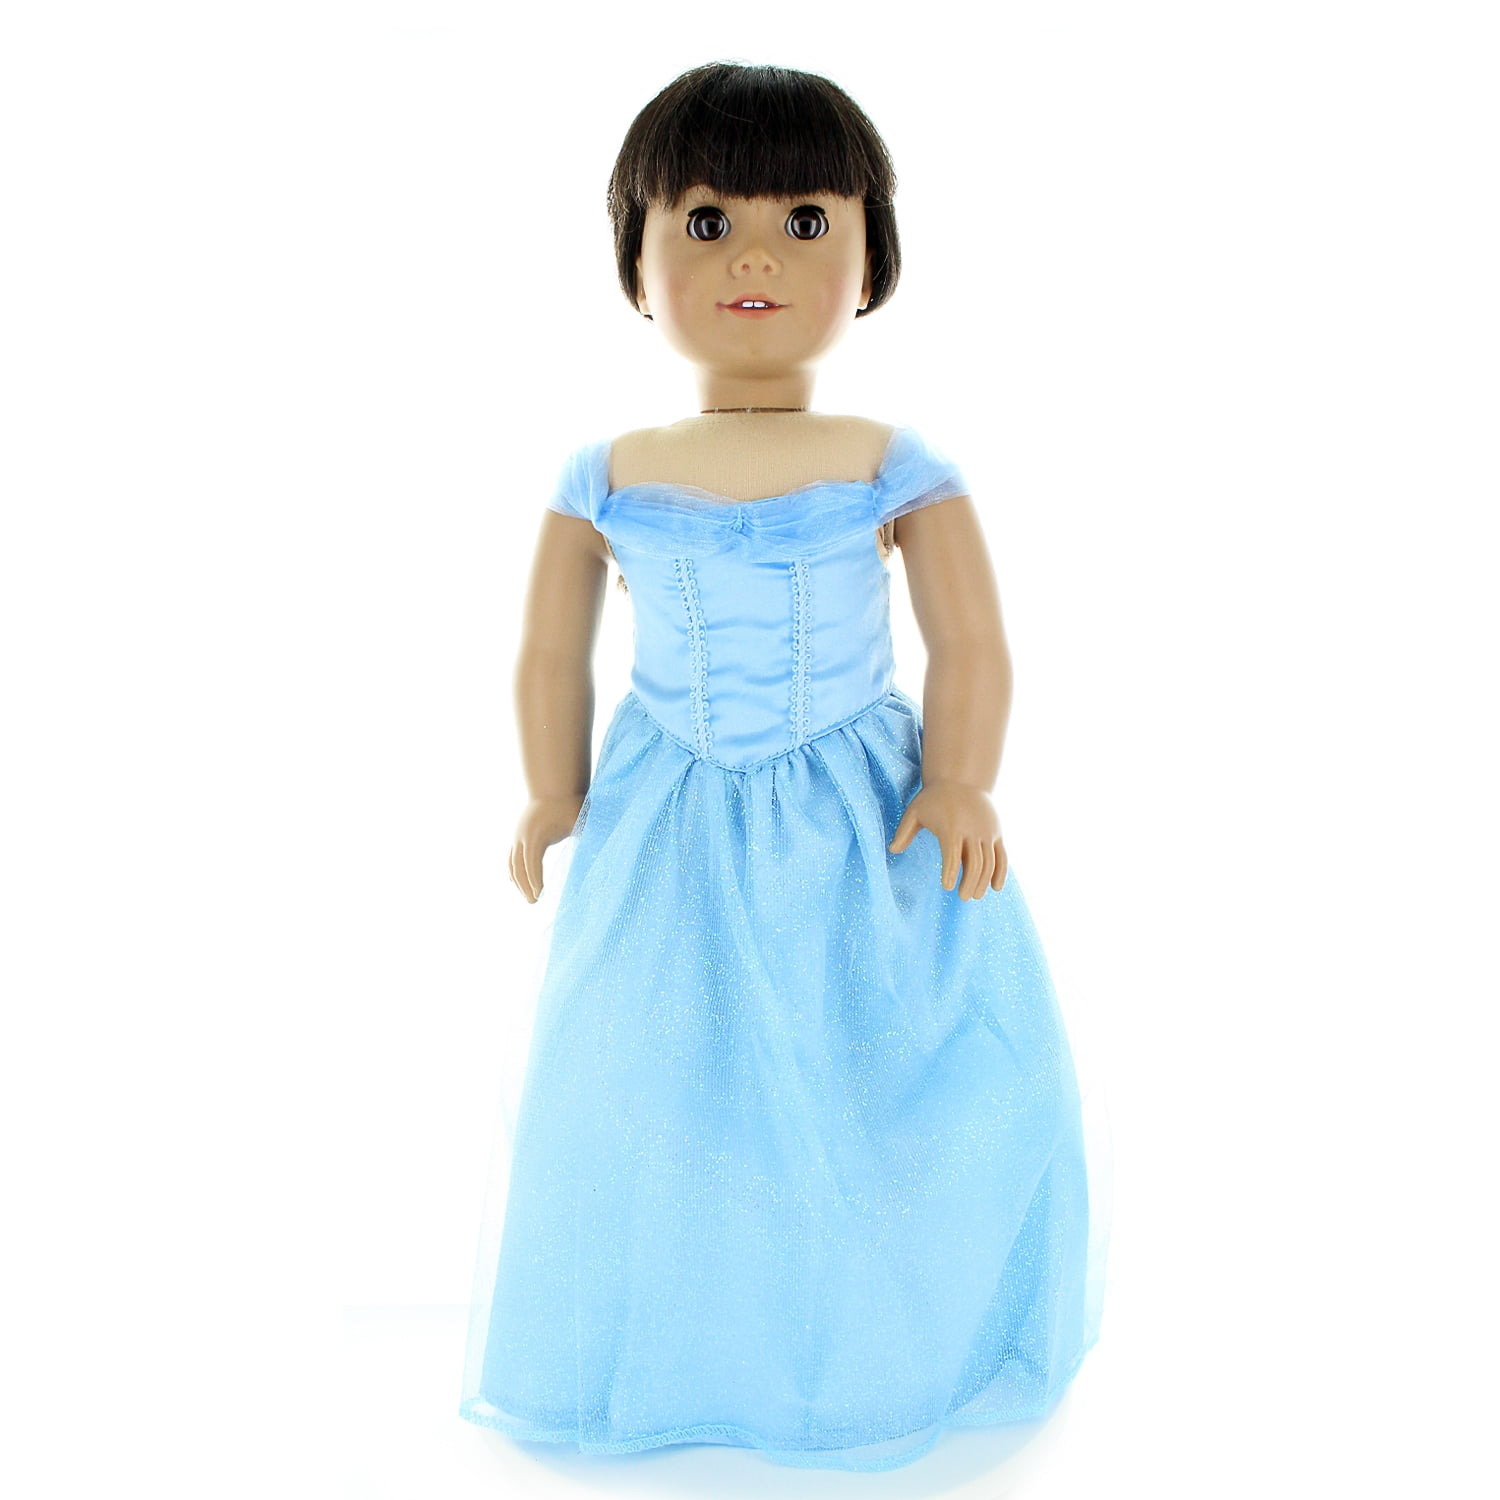 Doll Clothes Princess Blue Dress Outfit Fits American Girl Doll, My Life Doll  And Other 18 Inch Dolls